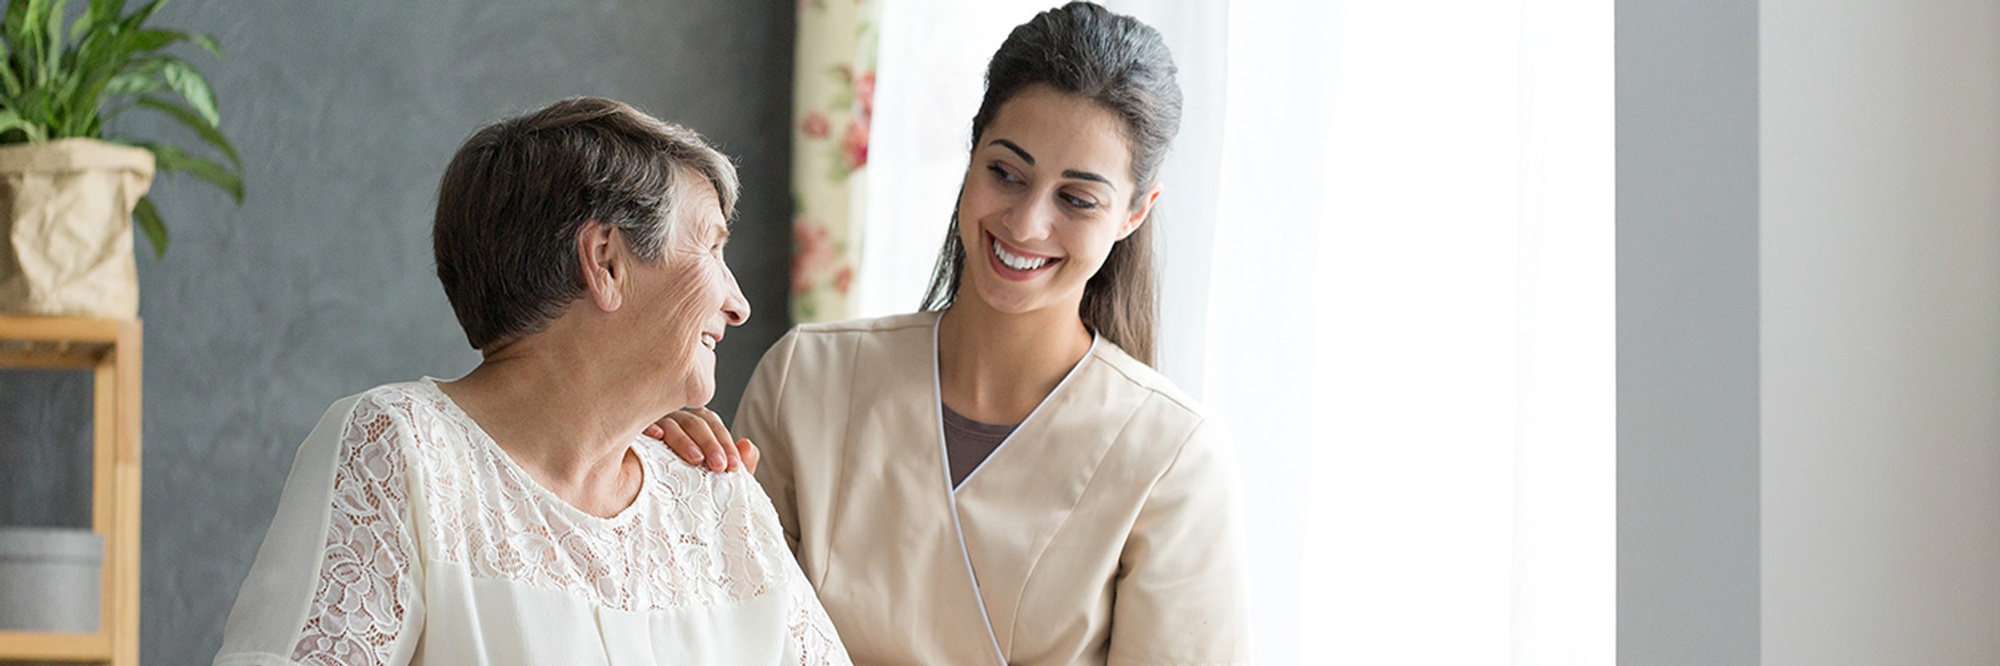 residential care facilities residential care facilities for elderly, residential care facilities in ga, residential care near me